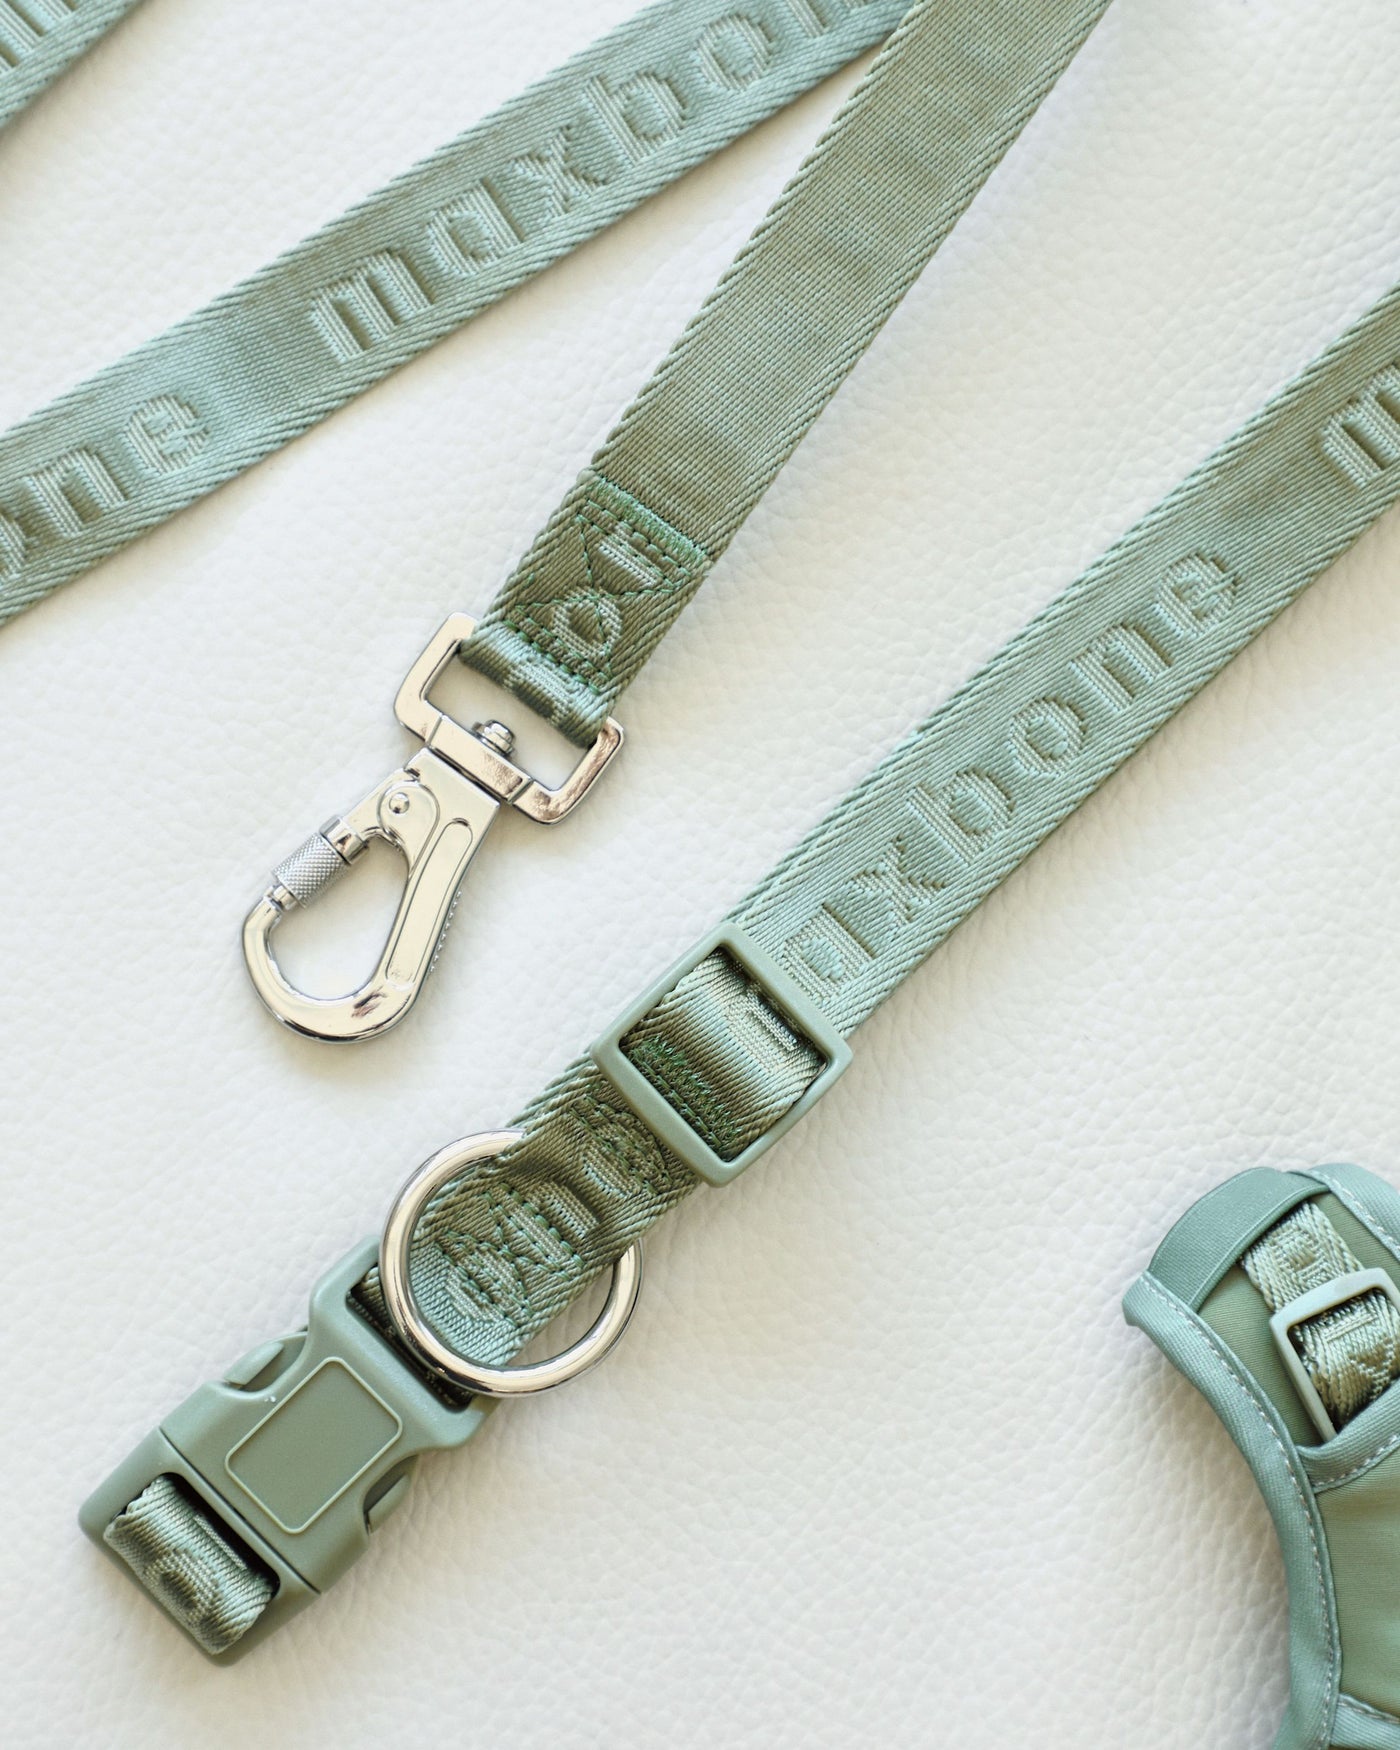 sage green nylon dog leash by maxbone with silver metal hardware and coordinate sage green plastic buckle